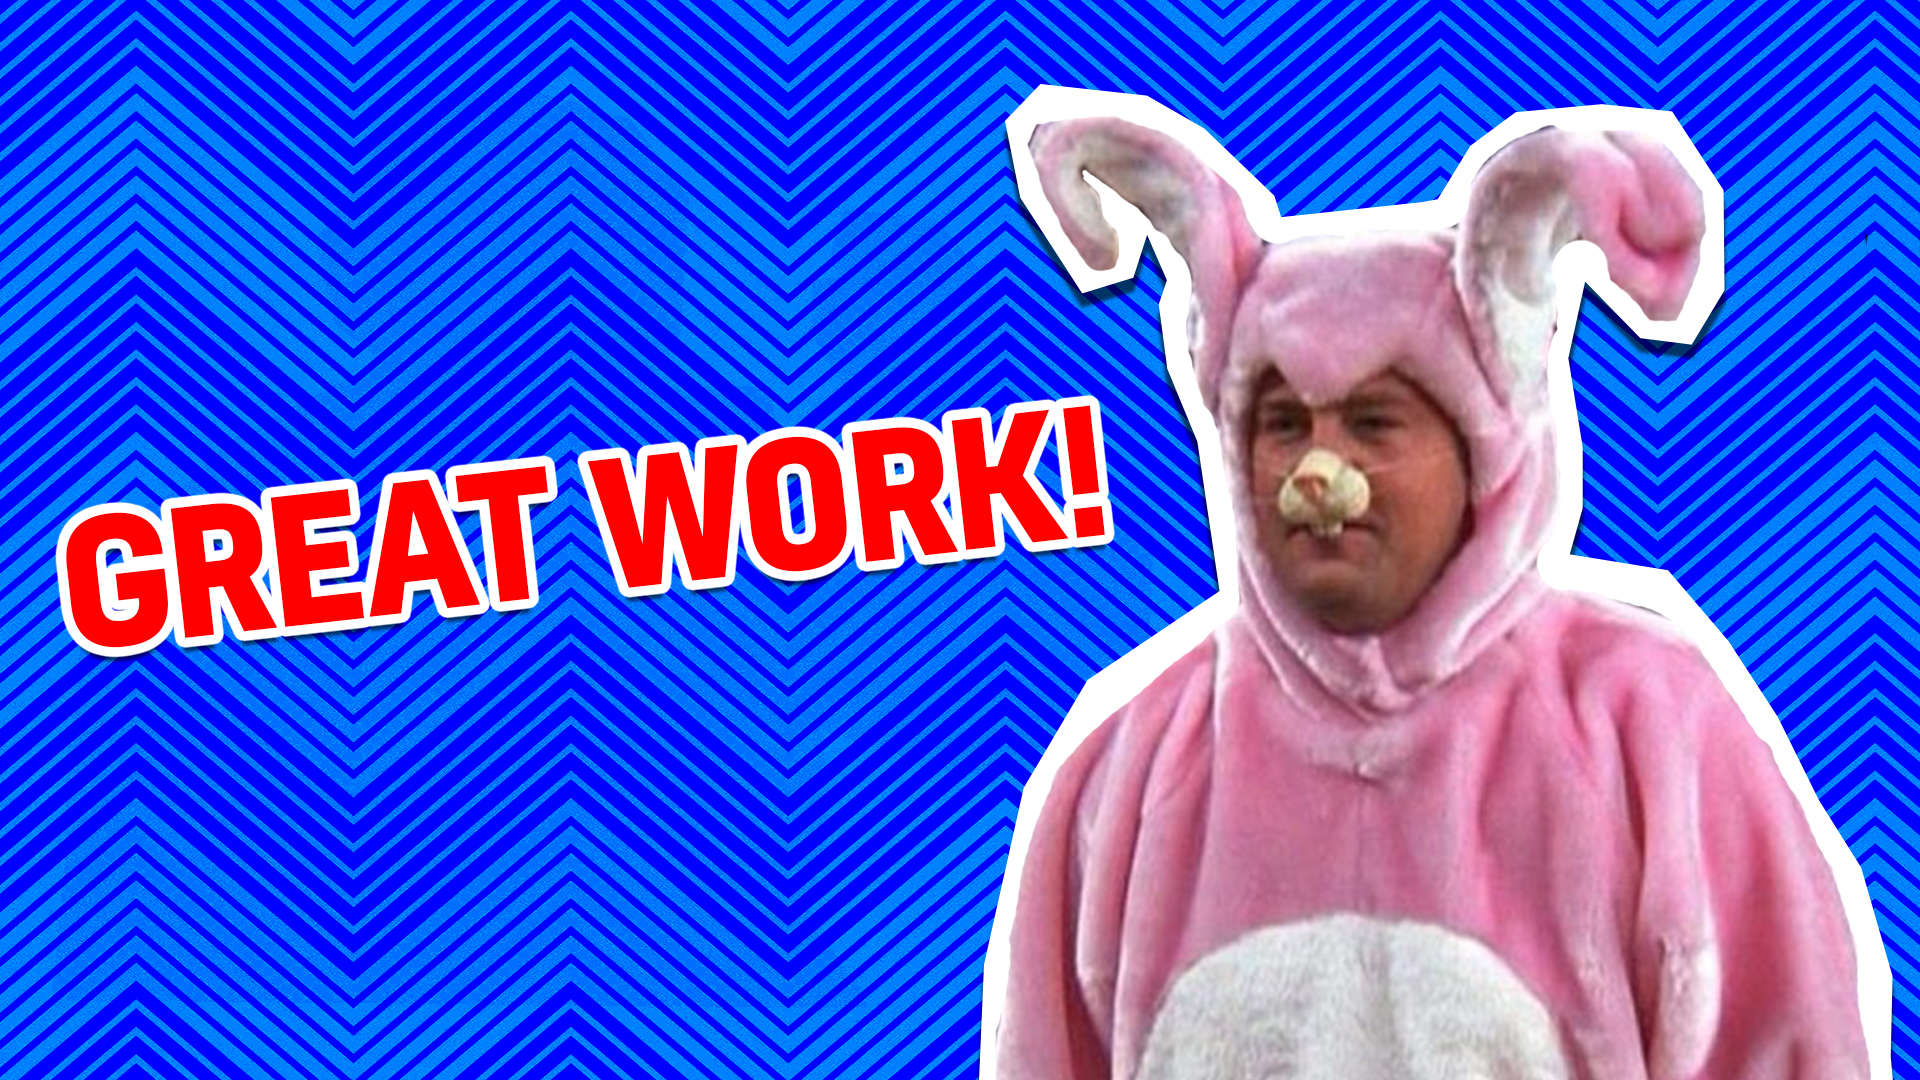 Chandler wears a bunny costume